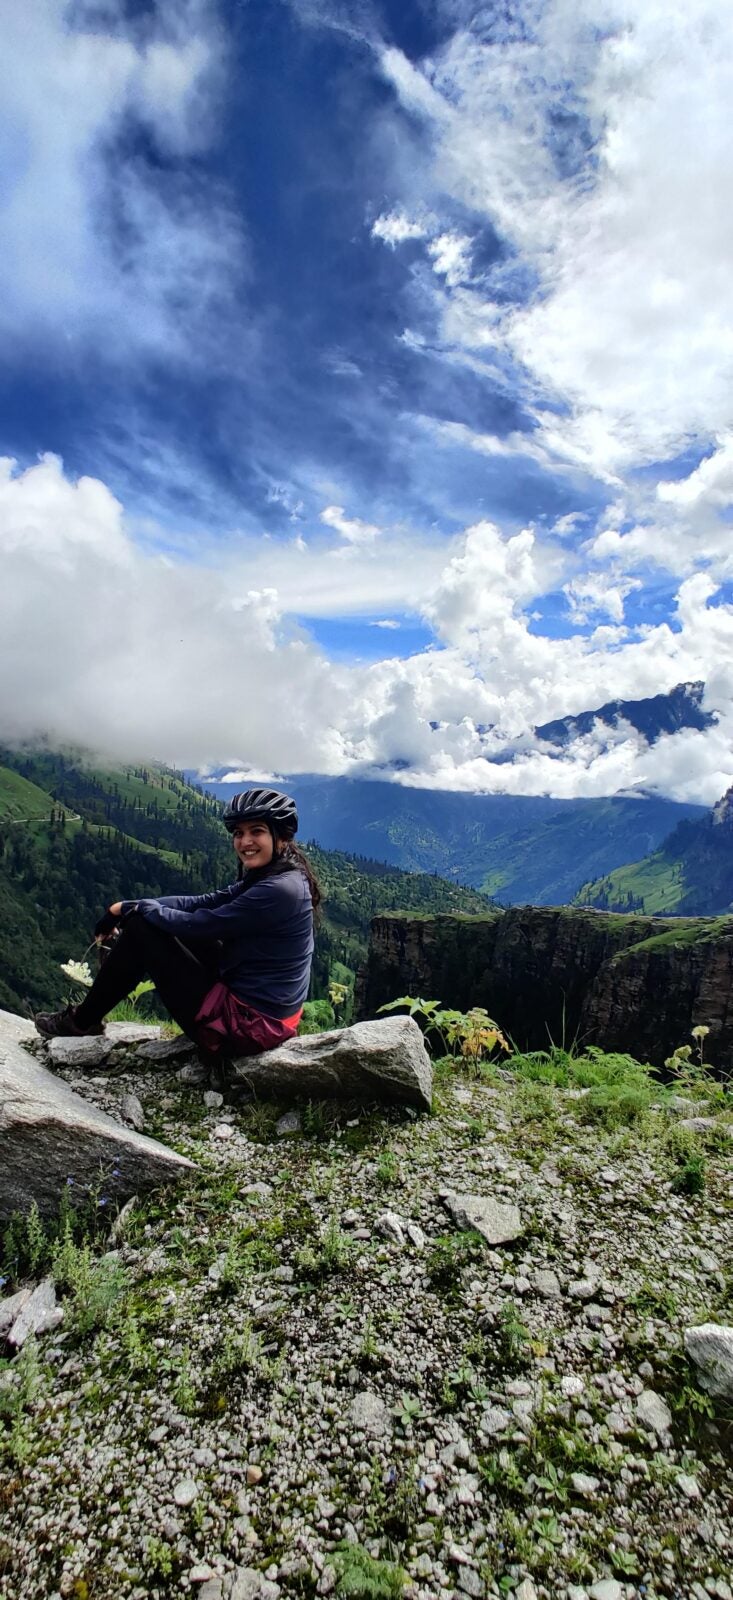 Pashmina wearing her cycling helmet and sitting on a rock while smiling. Behind her are mountains and clouds.